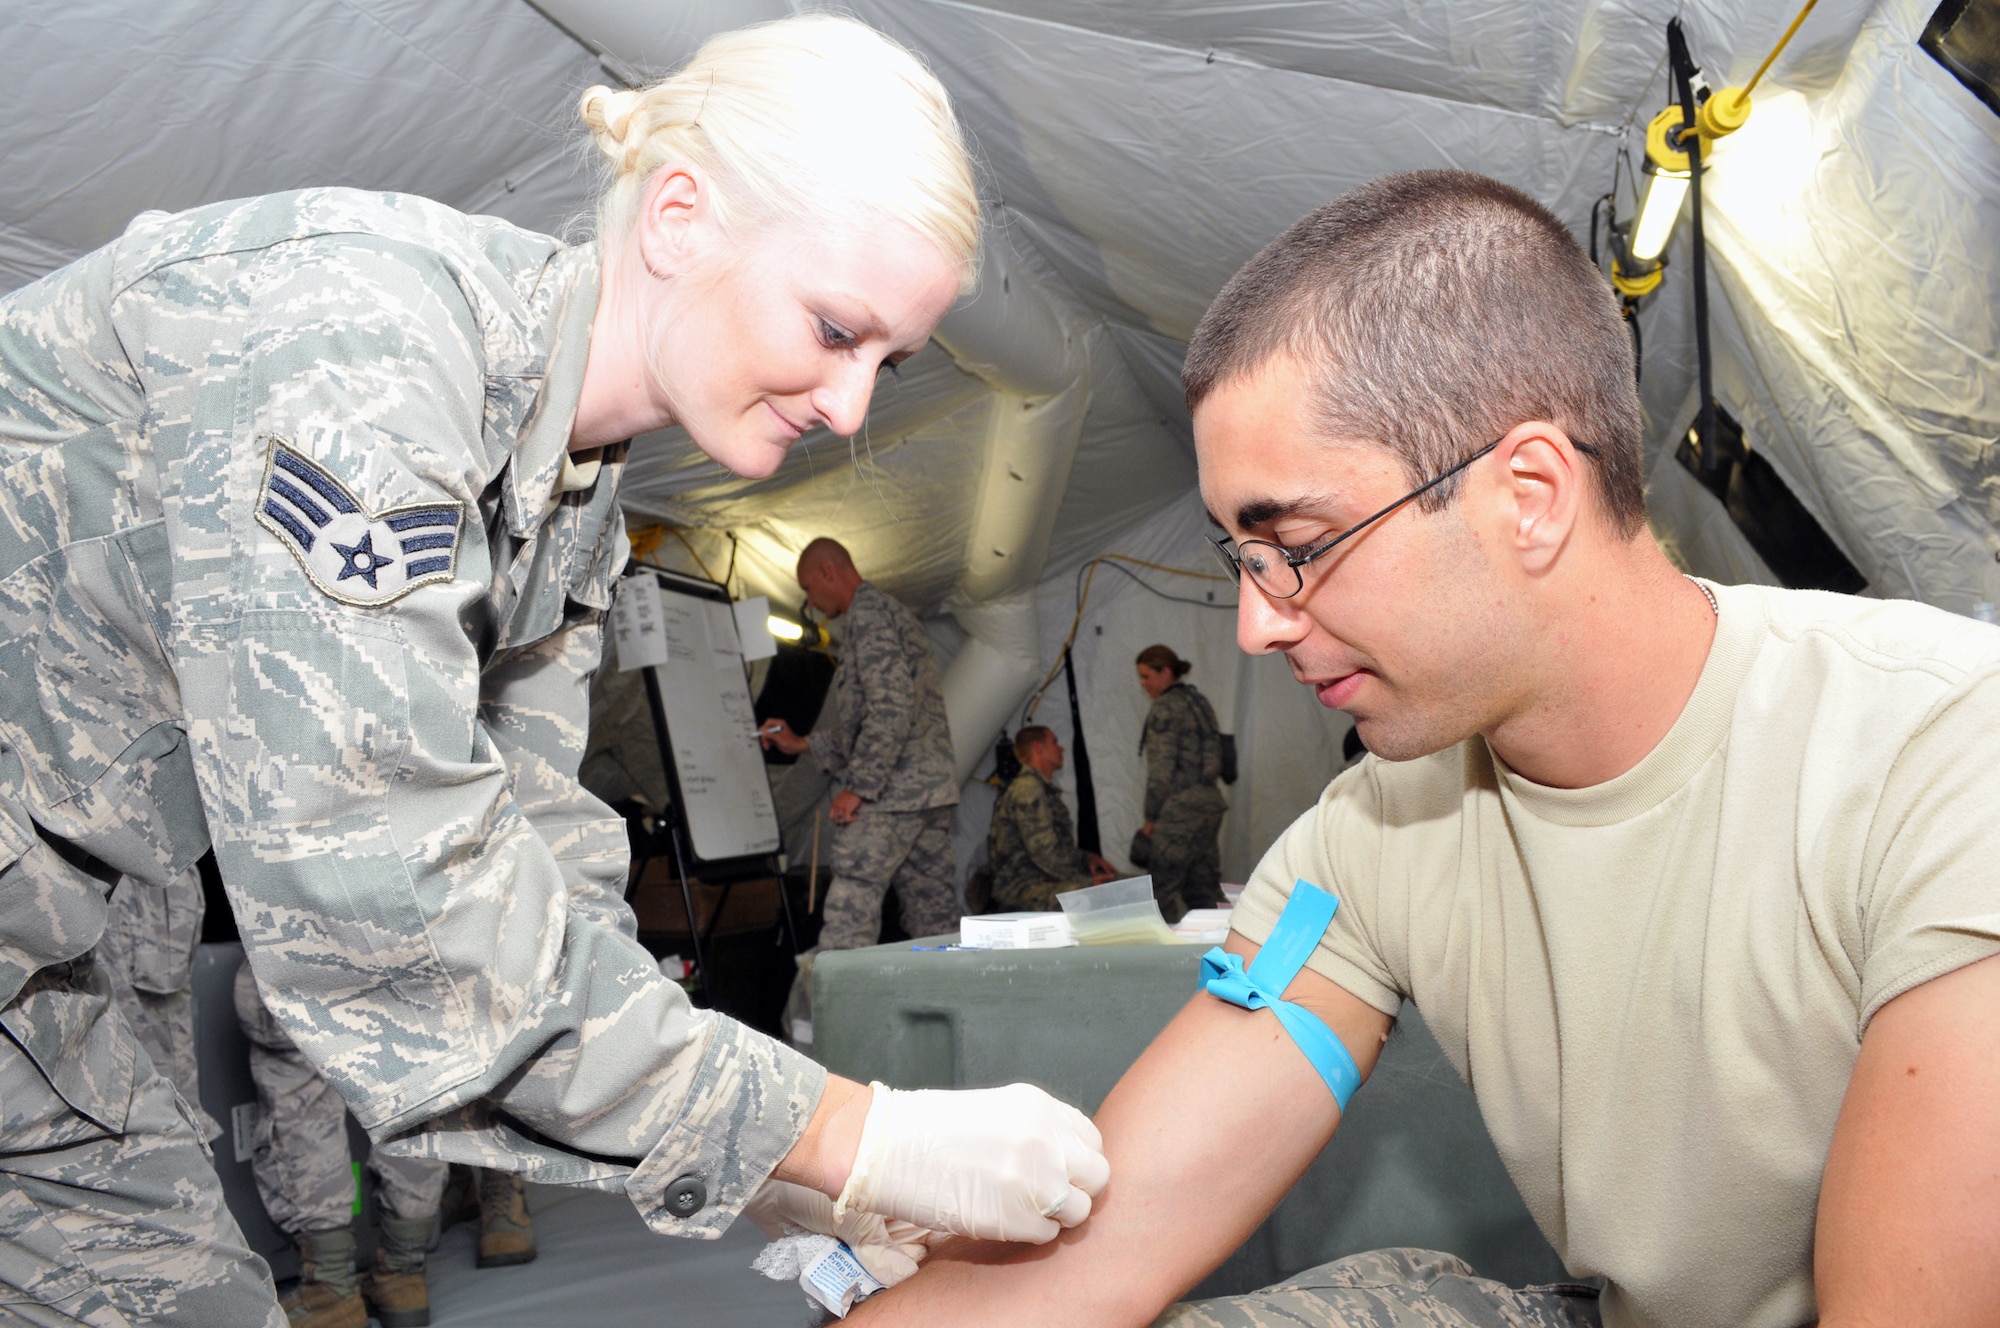 Senior Airman Kristen Hill (left) and Airman 1st Class Paul Longwroth (right) from the Nevada Air National Guard 152nd Medical Group hone their skills of performing medical lab work in field conditions during the National Guard PATRIOT 2014 exercise at Volk Field, Wis. Several units of the Air National Guard, Army National Guard and Reserve units from several states are working with local, state, and national organizations to train on, perform, and assess their ability to respond to multiple emergencies.